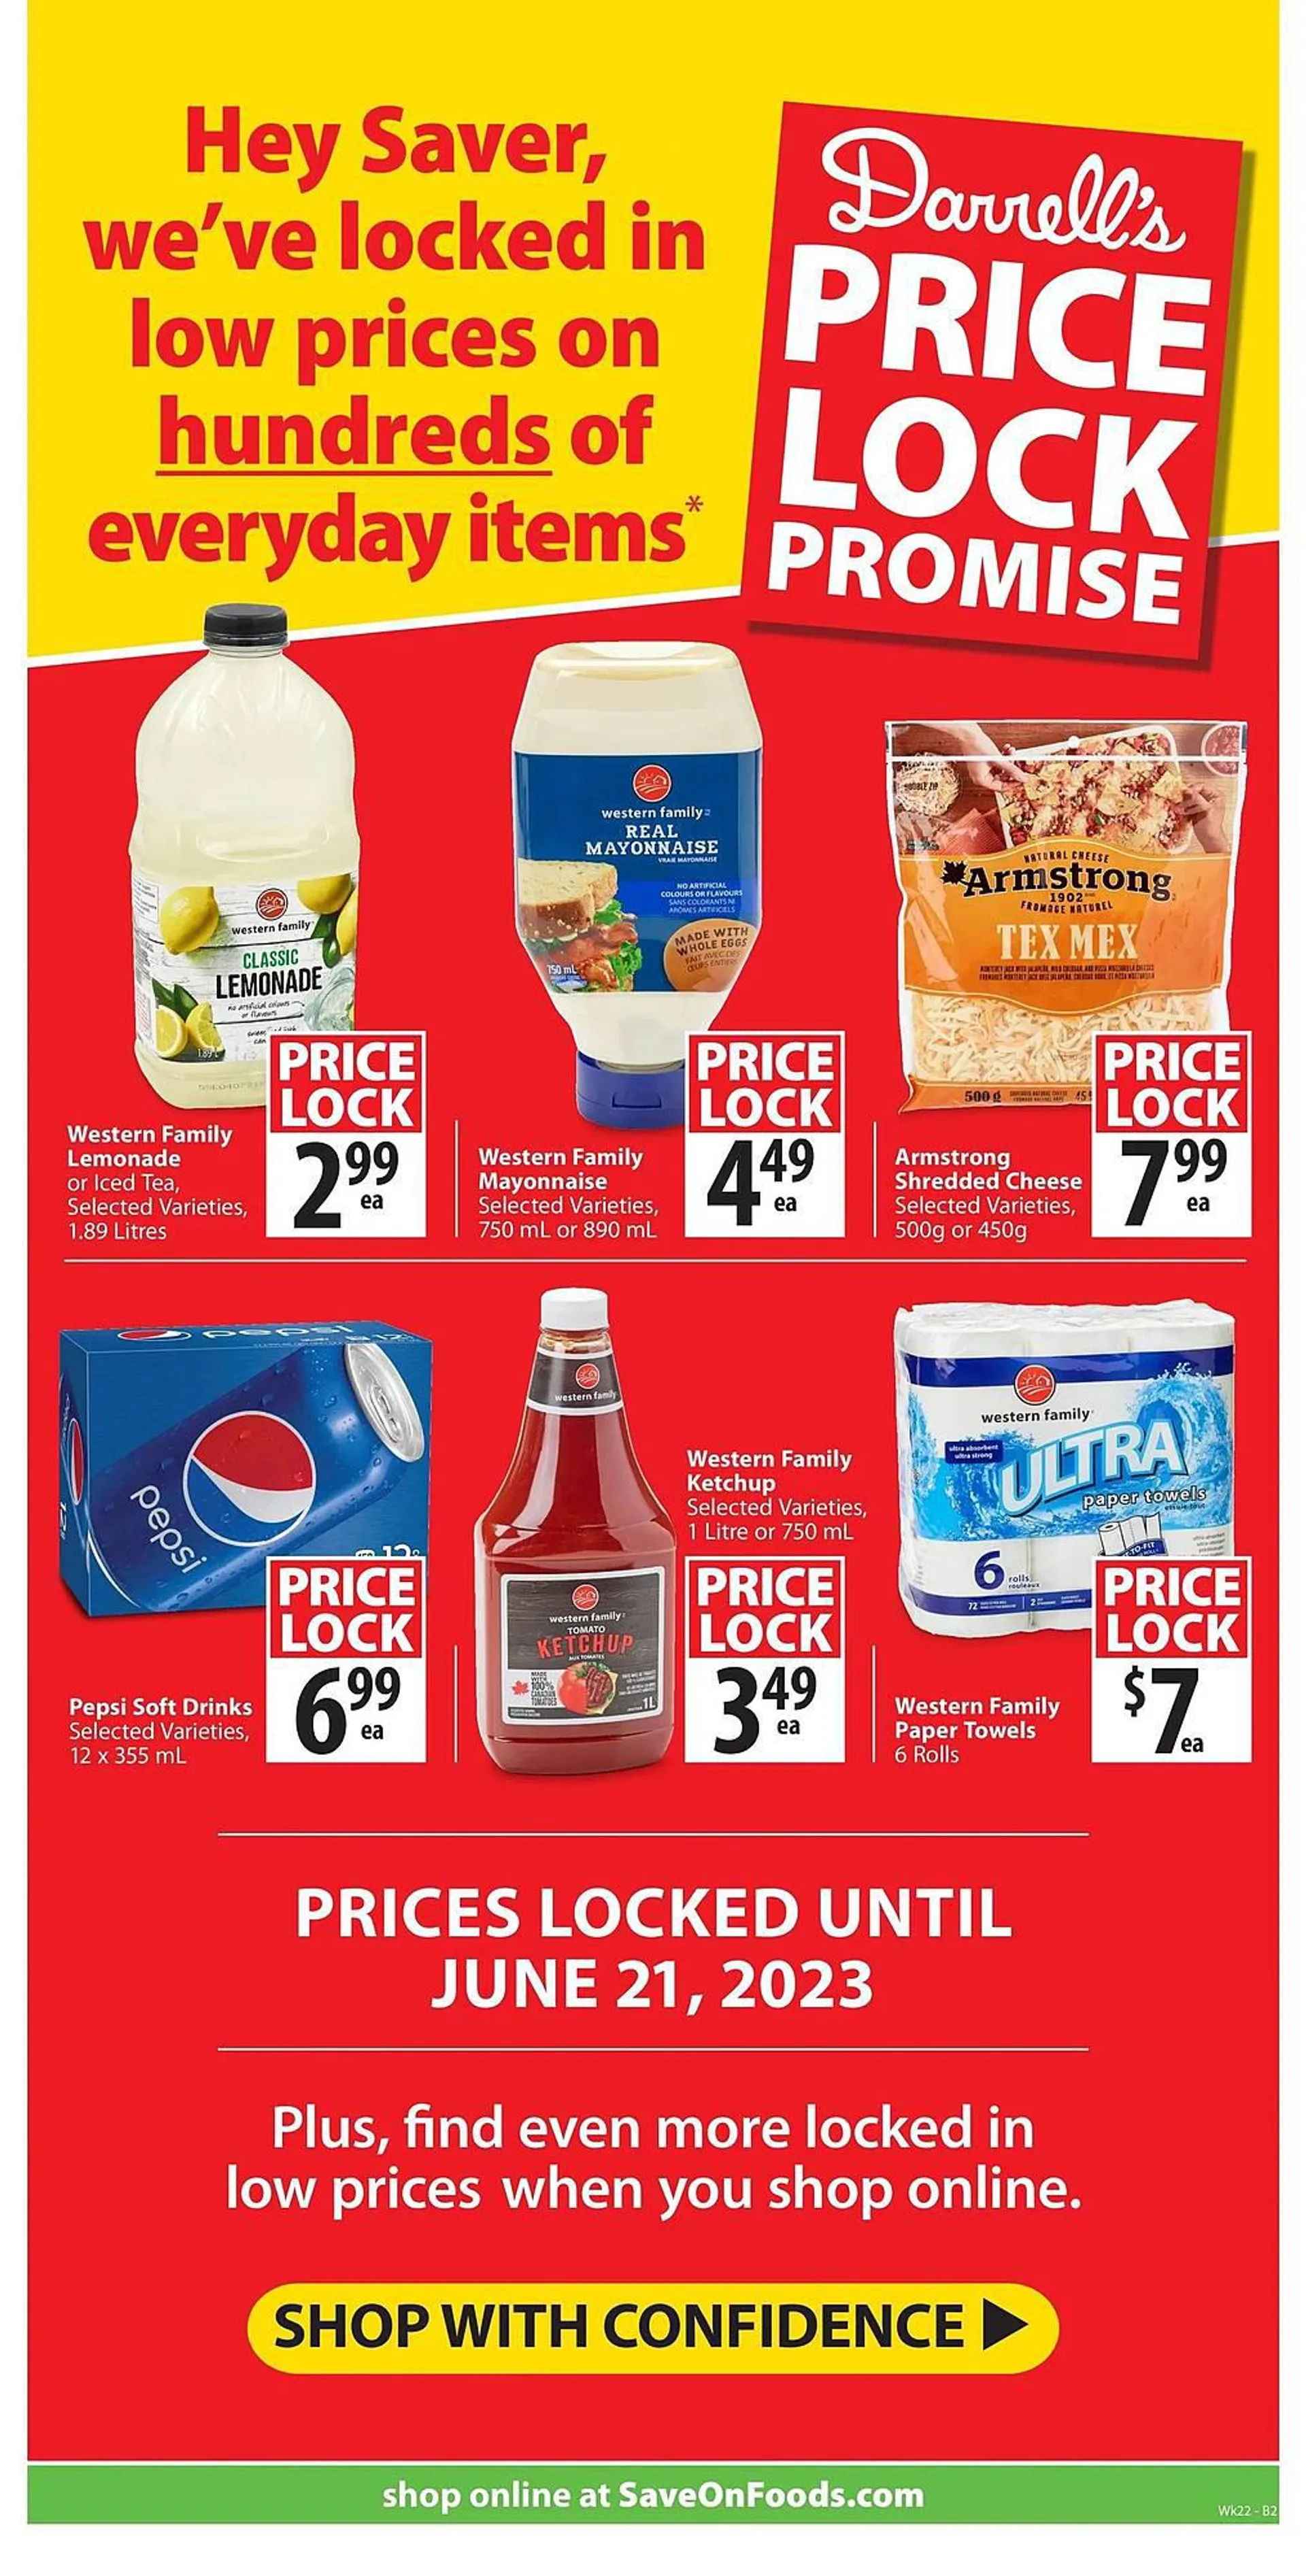 Save on Foods flyer - 39